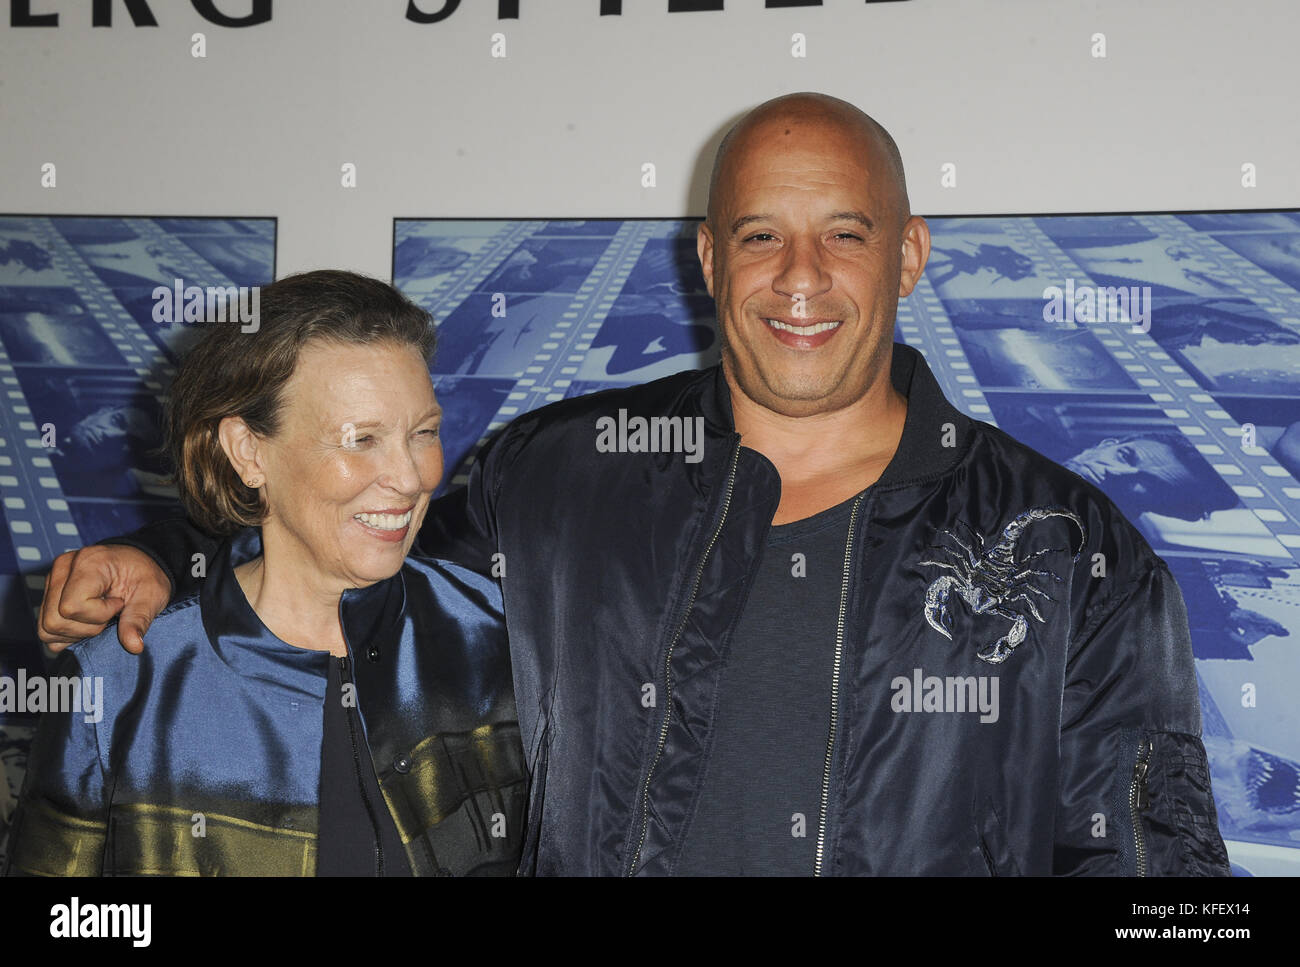 HBO Documentary Premiere of 'Spielberg' - Arrivals  Featuring: Delora Vincent, Vin Diesel Where: Los Angeles, California, United States When: 27 Sep 2017 Credit: Apega/WENN.com Stock Photo